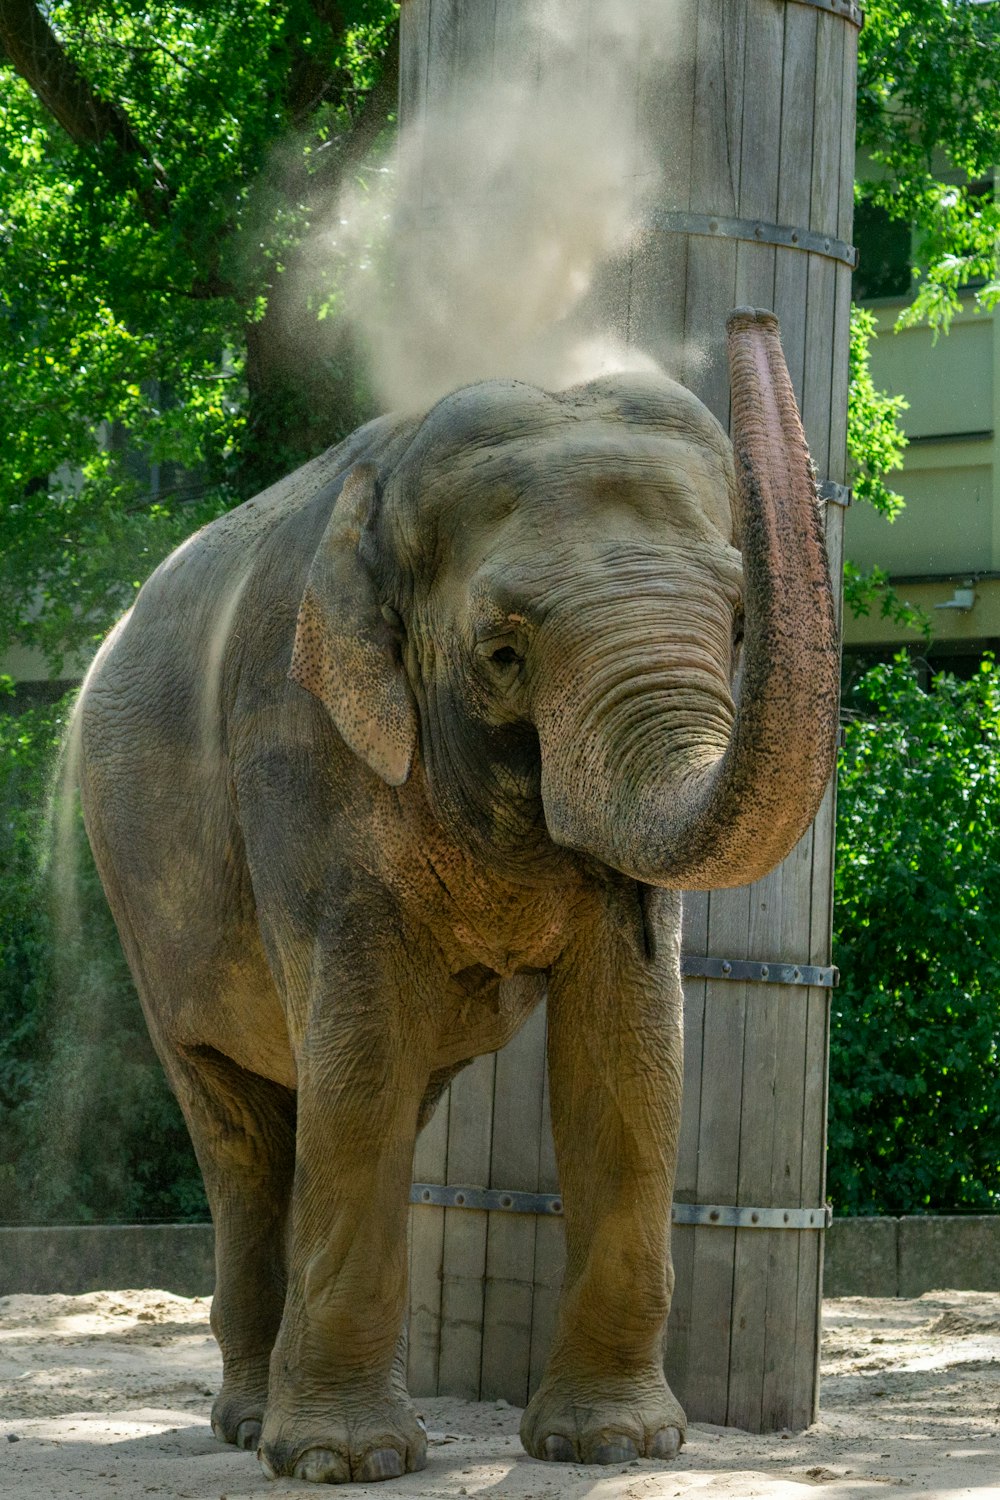 an elephant standing next to a tall wooden pole